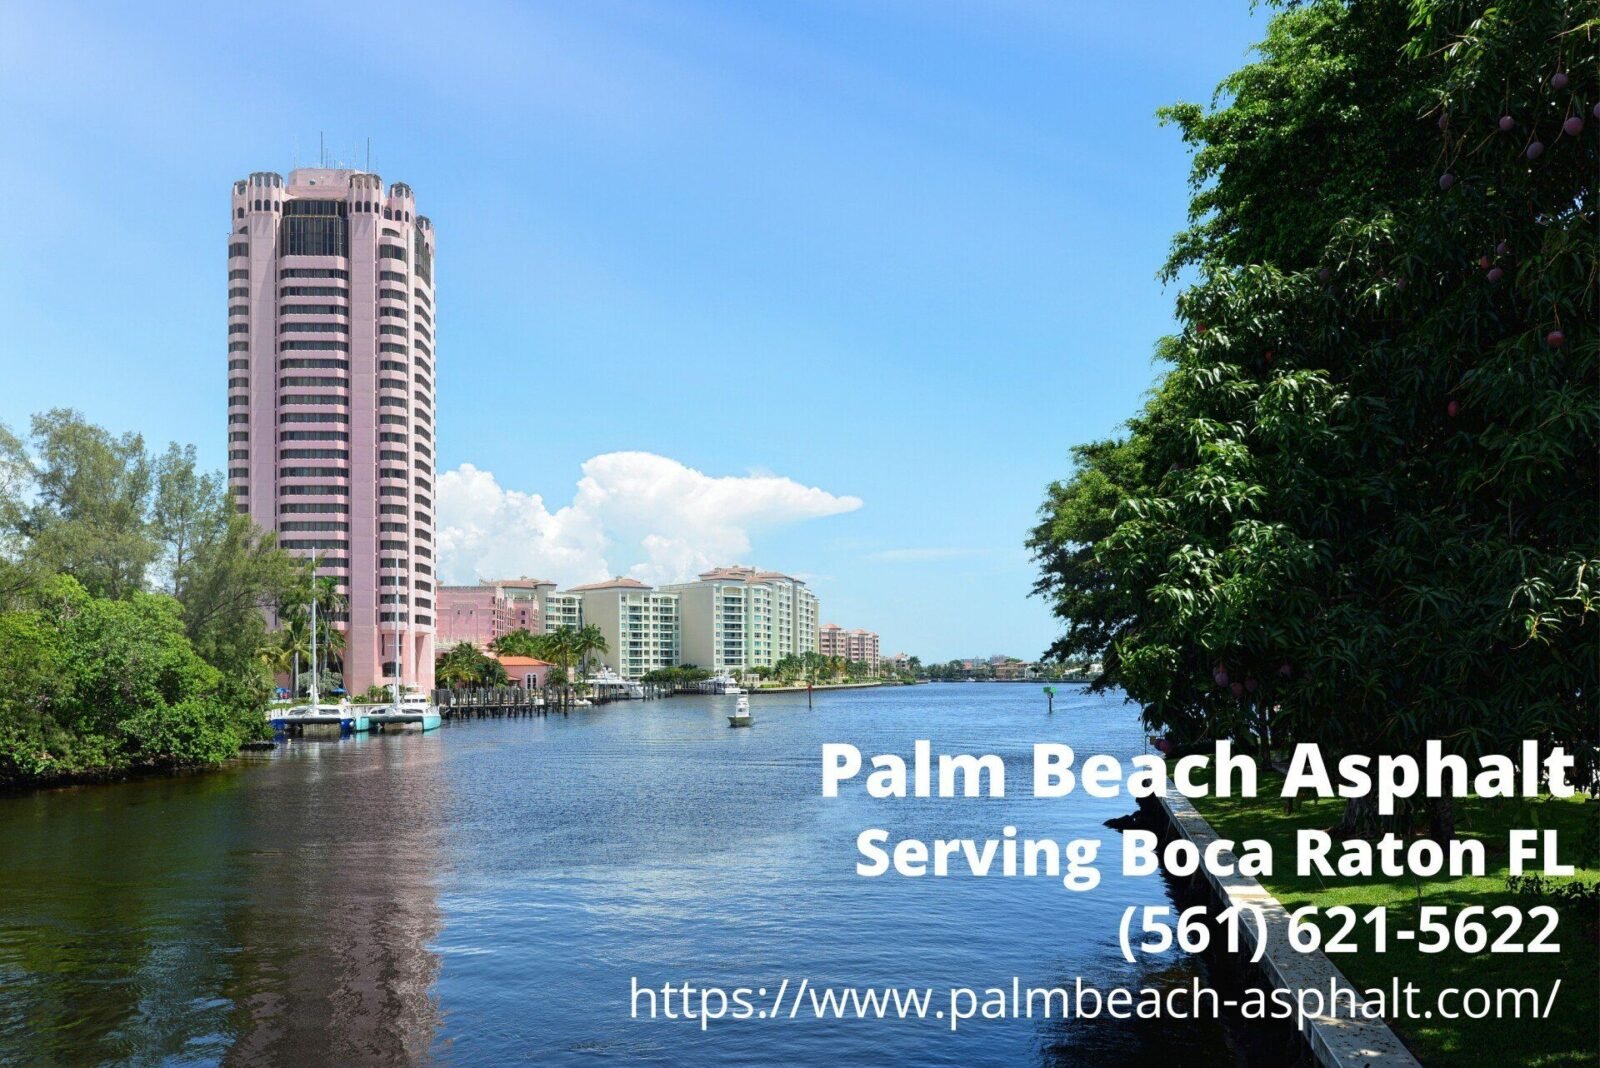 a picturesque view of Boca Raton FL, featuring the contact details of Palm Beach Asphalt